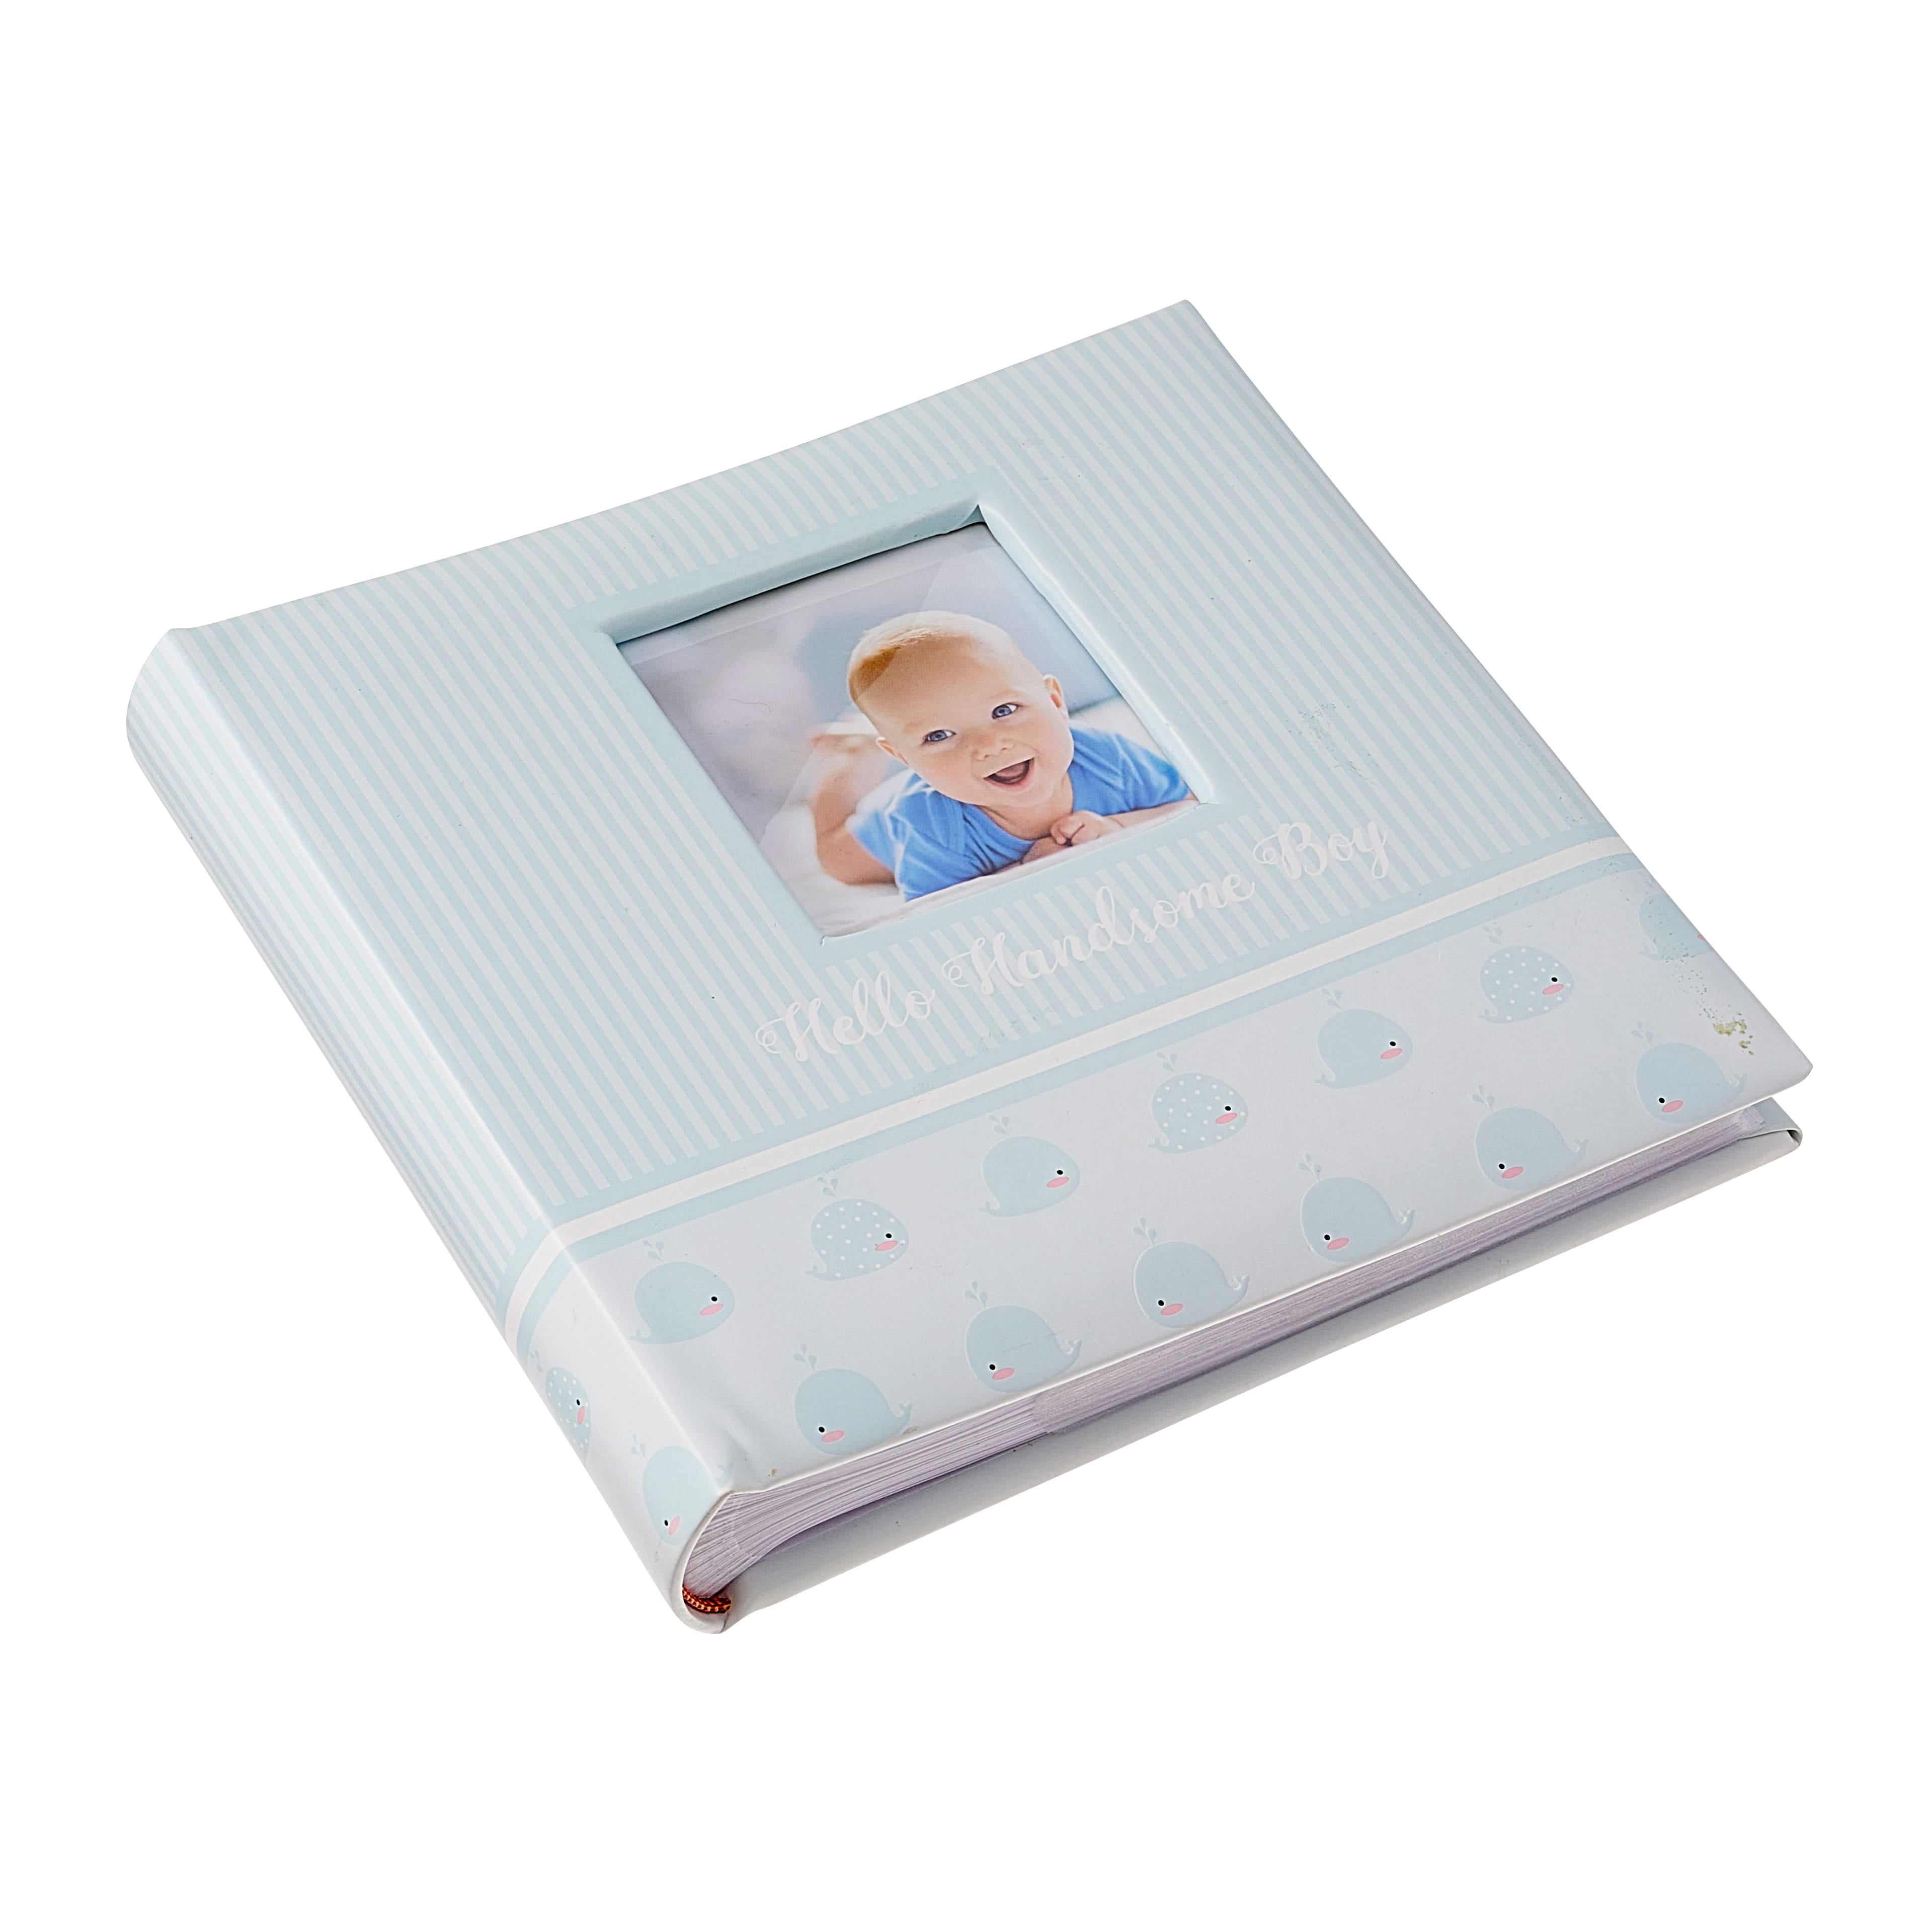 RECUTMS Small Photo Album 4x6 Paper Core Insert Inside Page Picture Album  PU Leather Cover 300 Photo Sleeves Boy Girl Family Photo Book Memo Slot